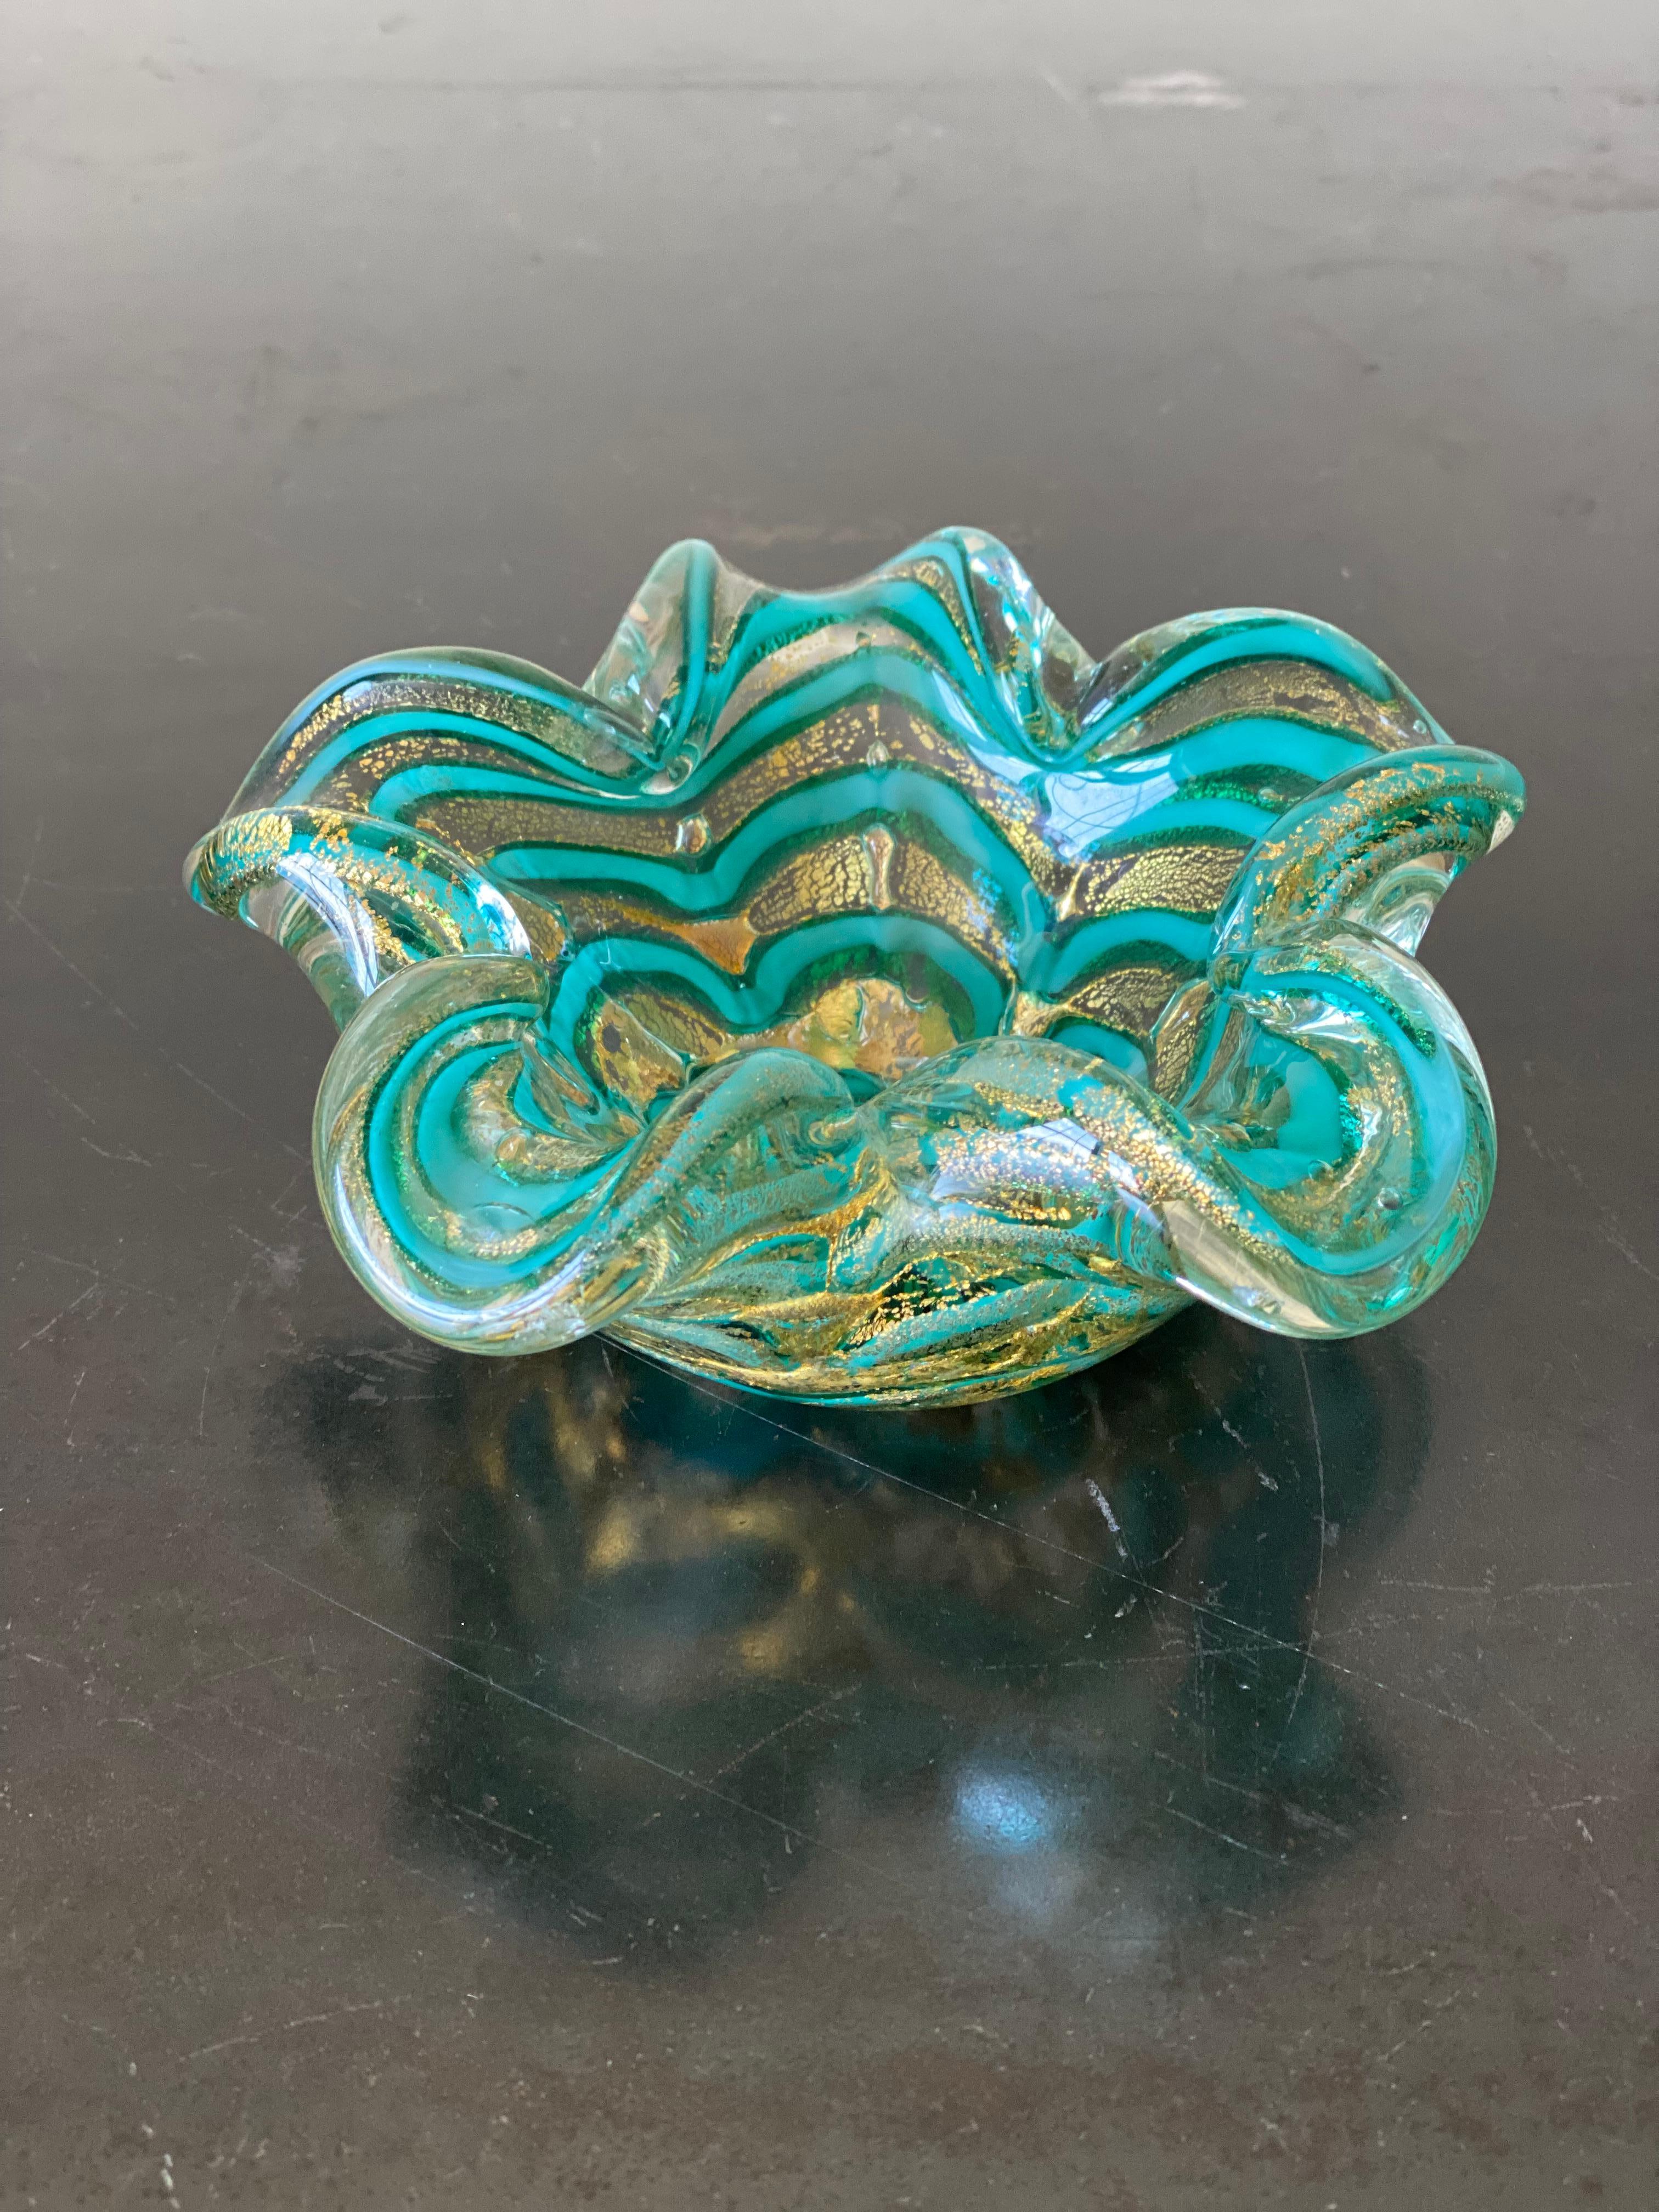 Gorgeous Murano, Italy glass decorative bowl. Hand blown in the shape of a flower. Featuring alternating clear glass and green glass stripes around the floral shape as well as 